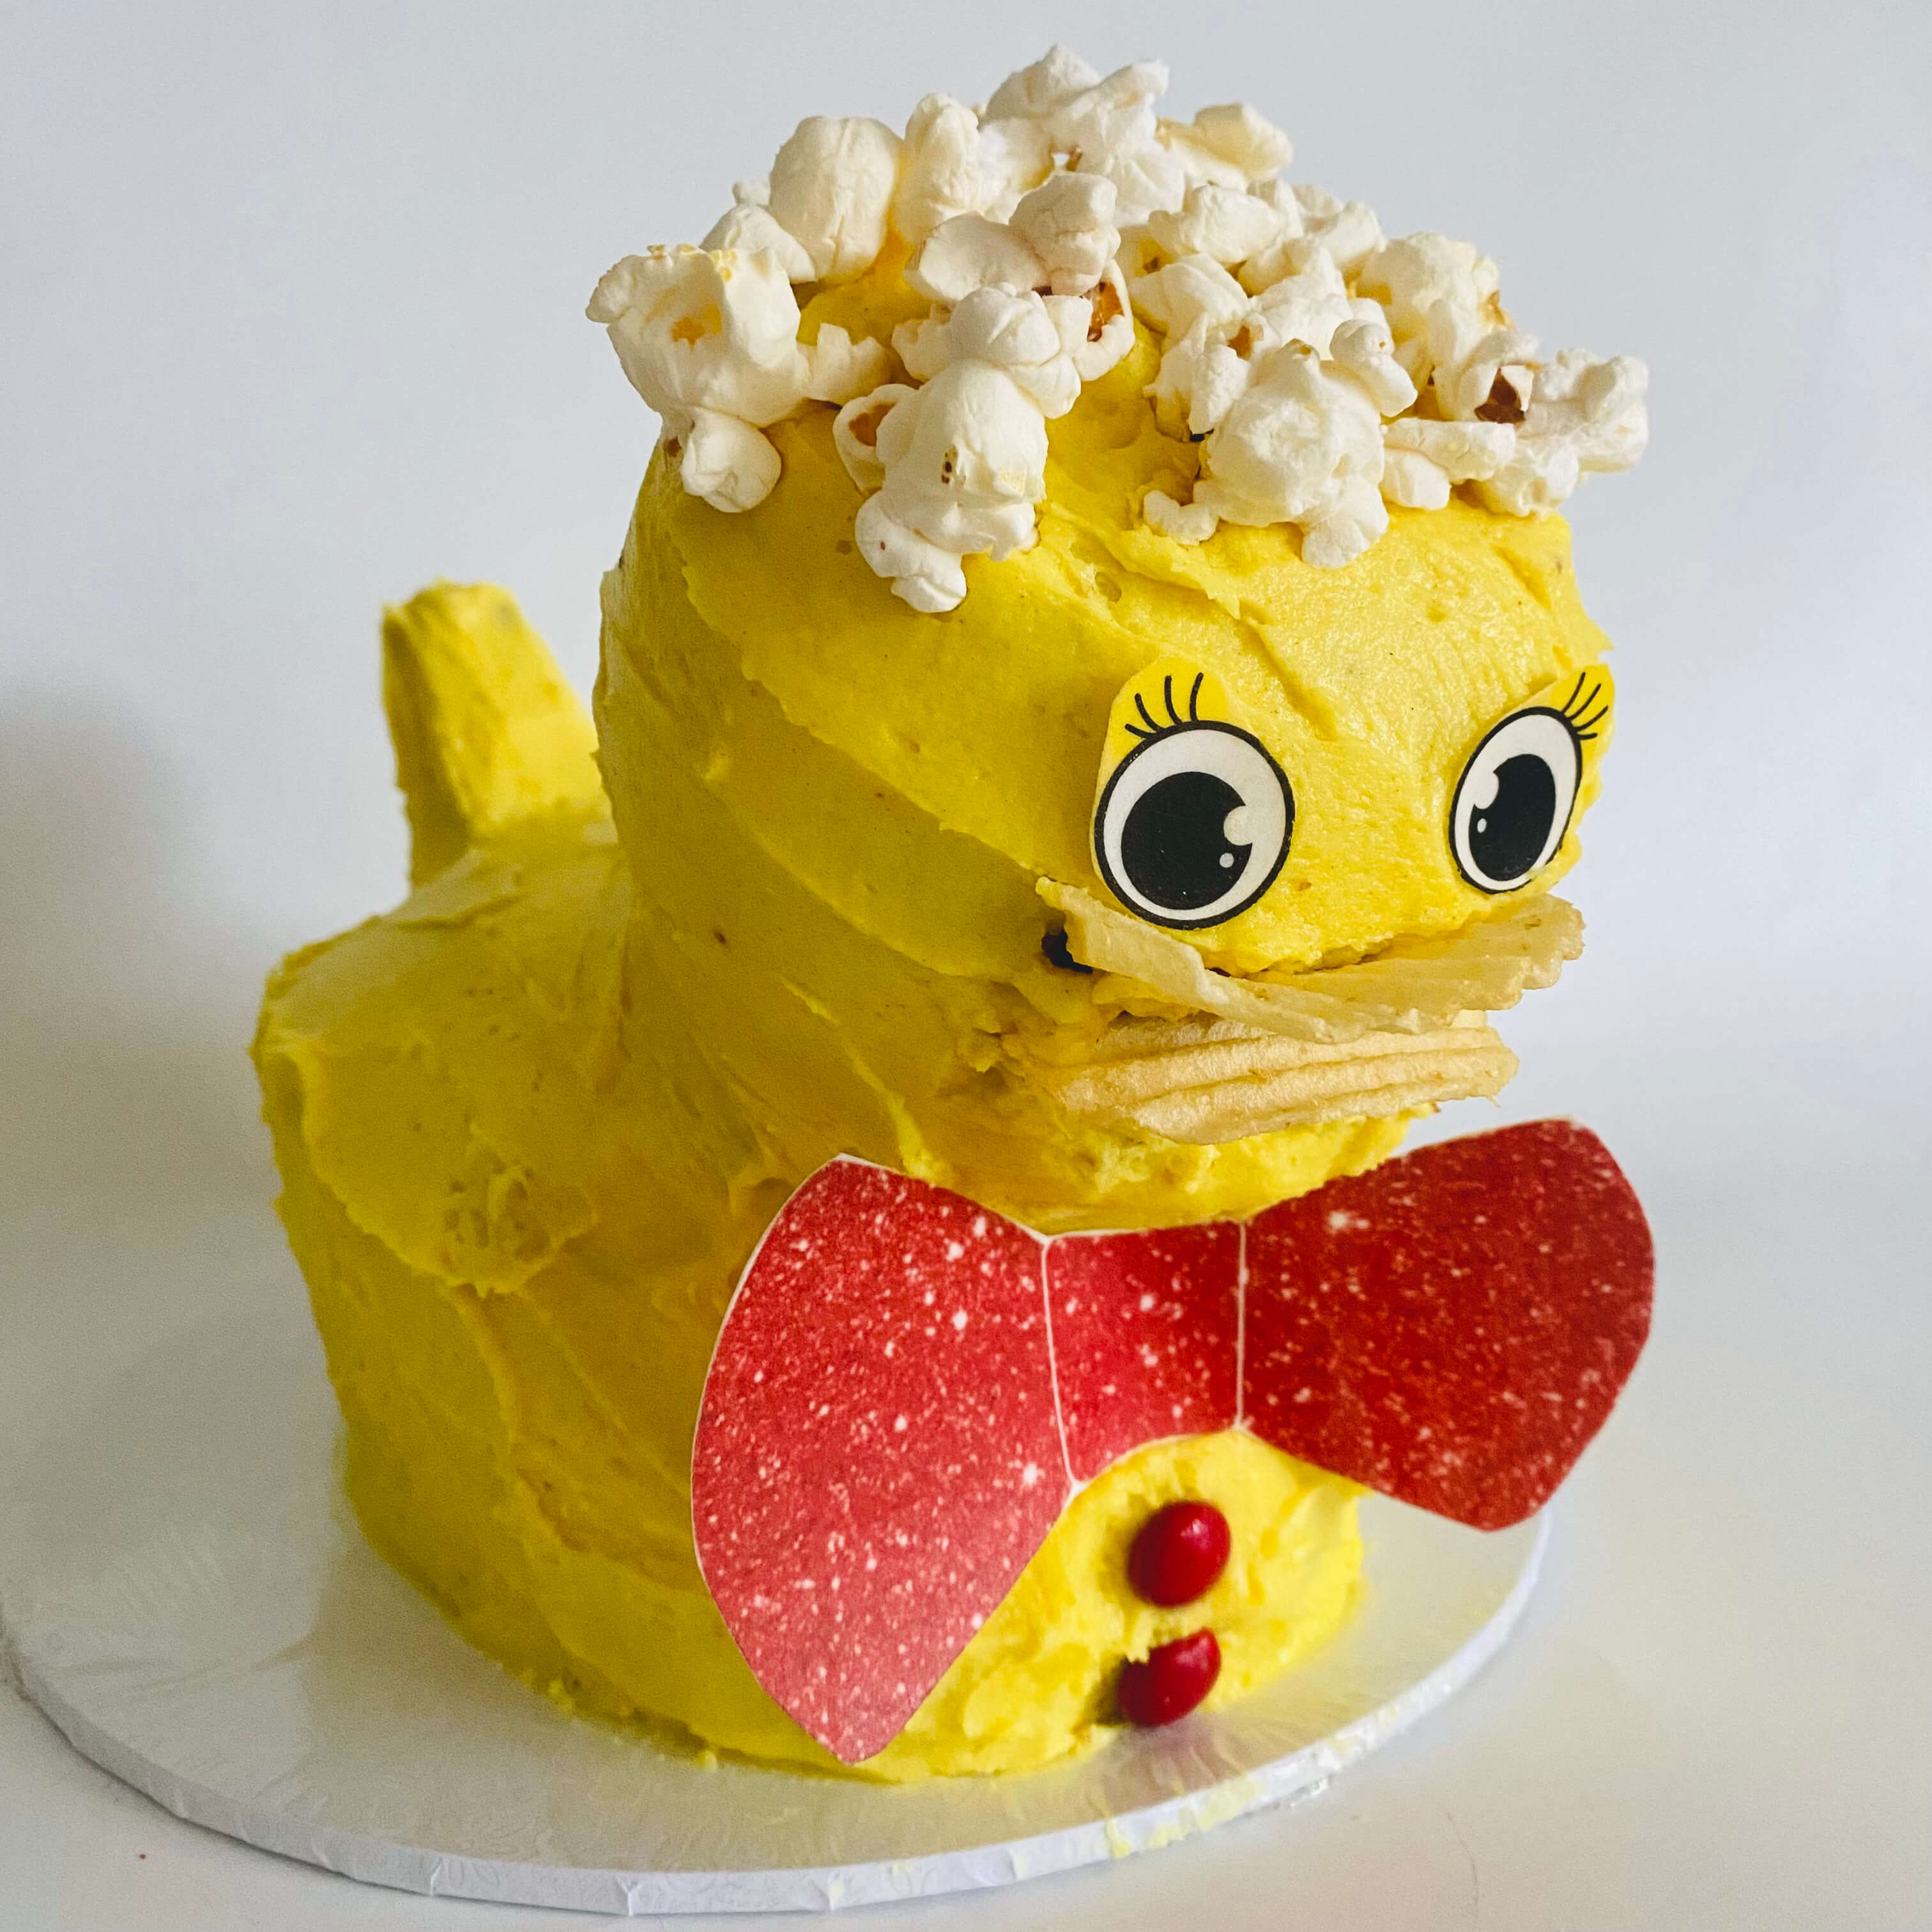 Home bakers share their duck cake from Australian's Women's Weekly  Children's Birthday Cake Book | Daily Mail Online